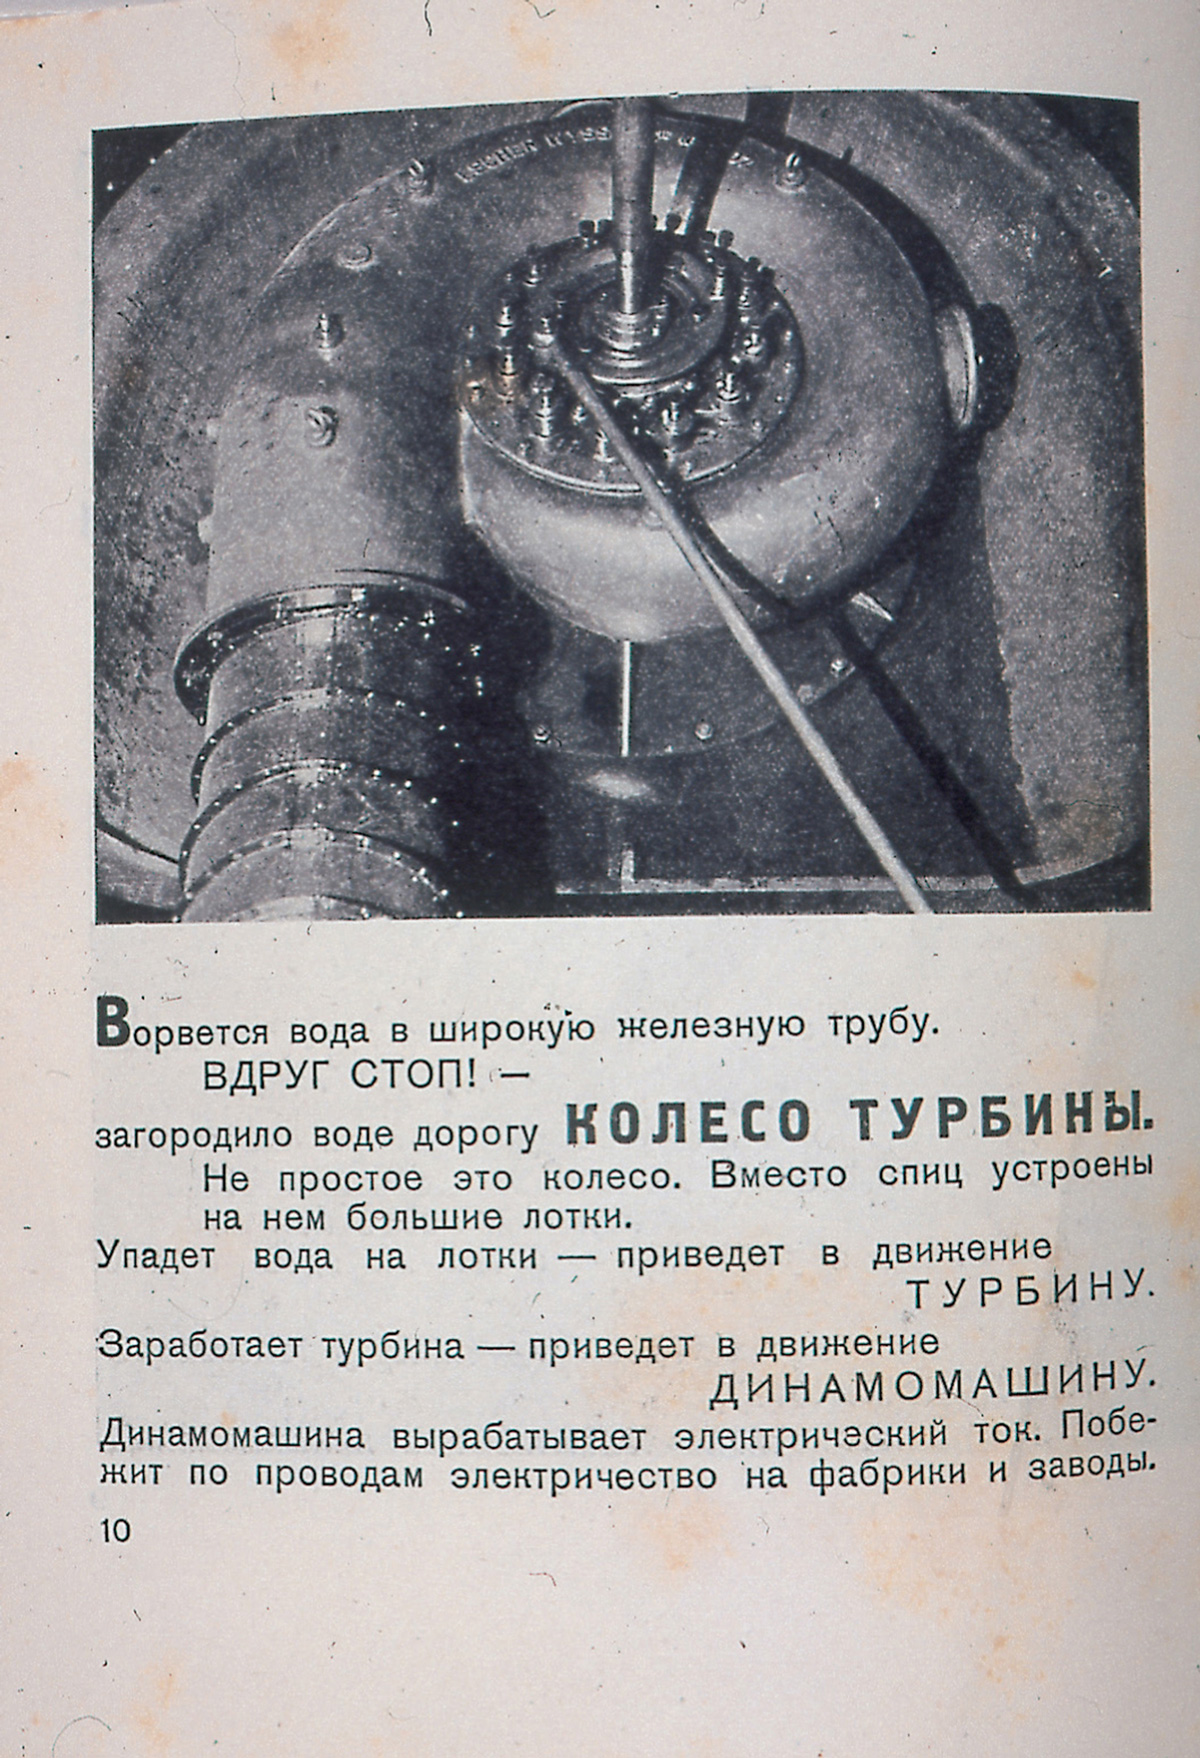 Photomechanical illustration (after a photograph) for Dneprostroi (Leningrad, GIZ, 1930), the George Riabov Collection, ZAM, Rutgers, the State University of New Jersey, David A. and Mildred H. Morse Art Acquisition Fund.